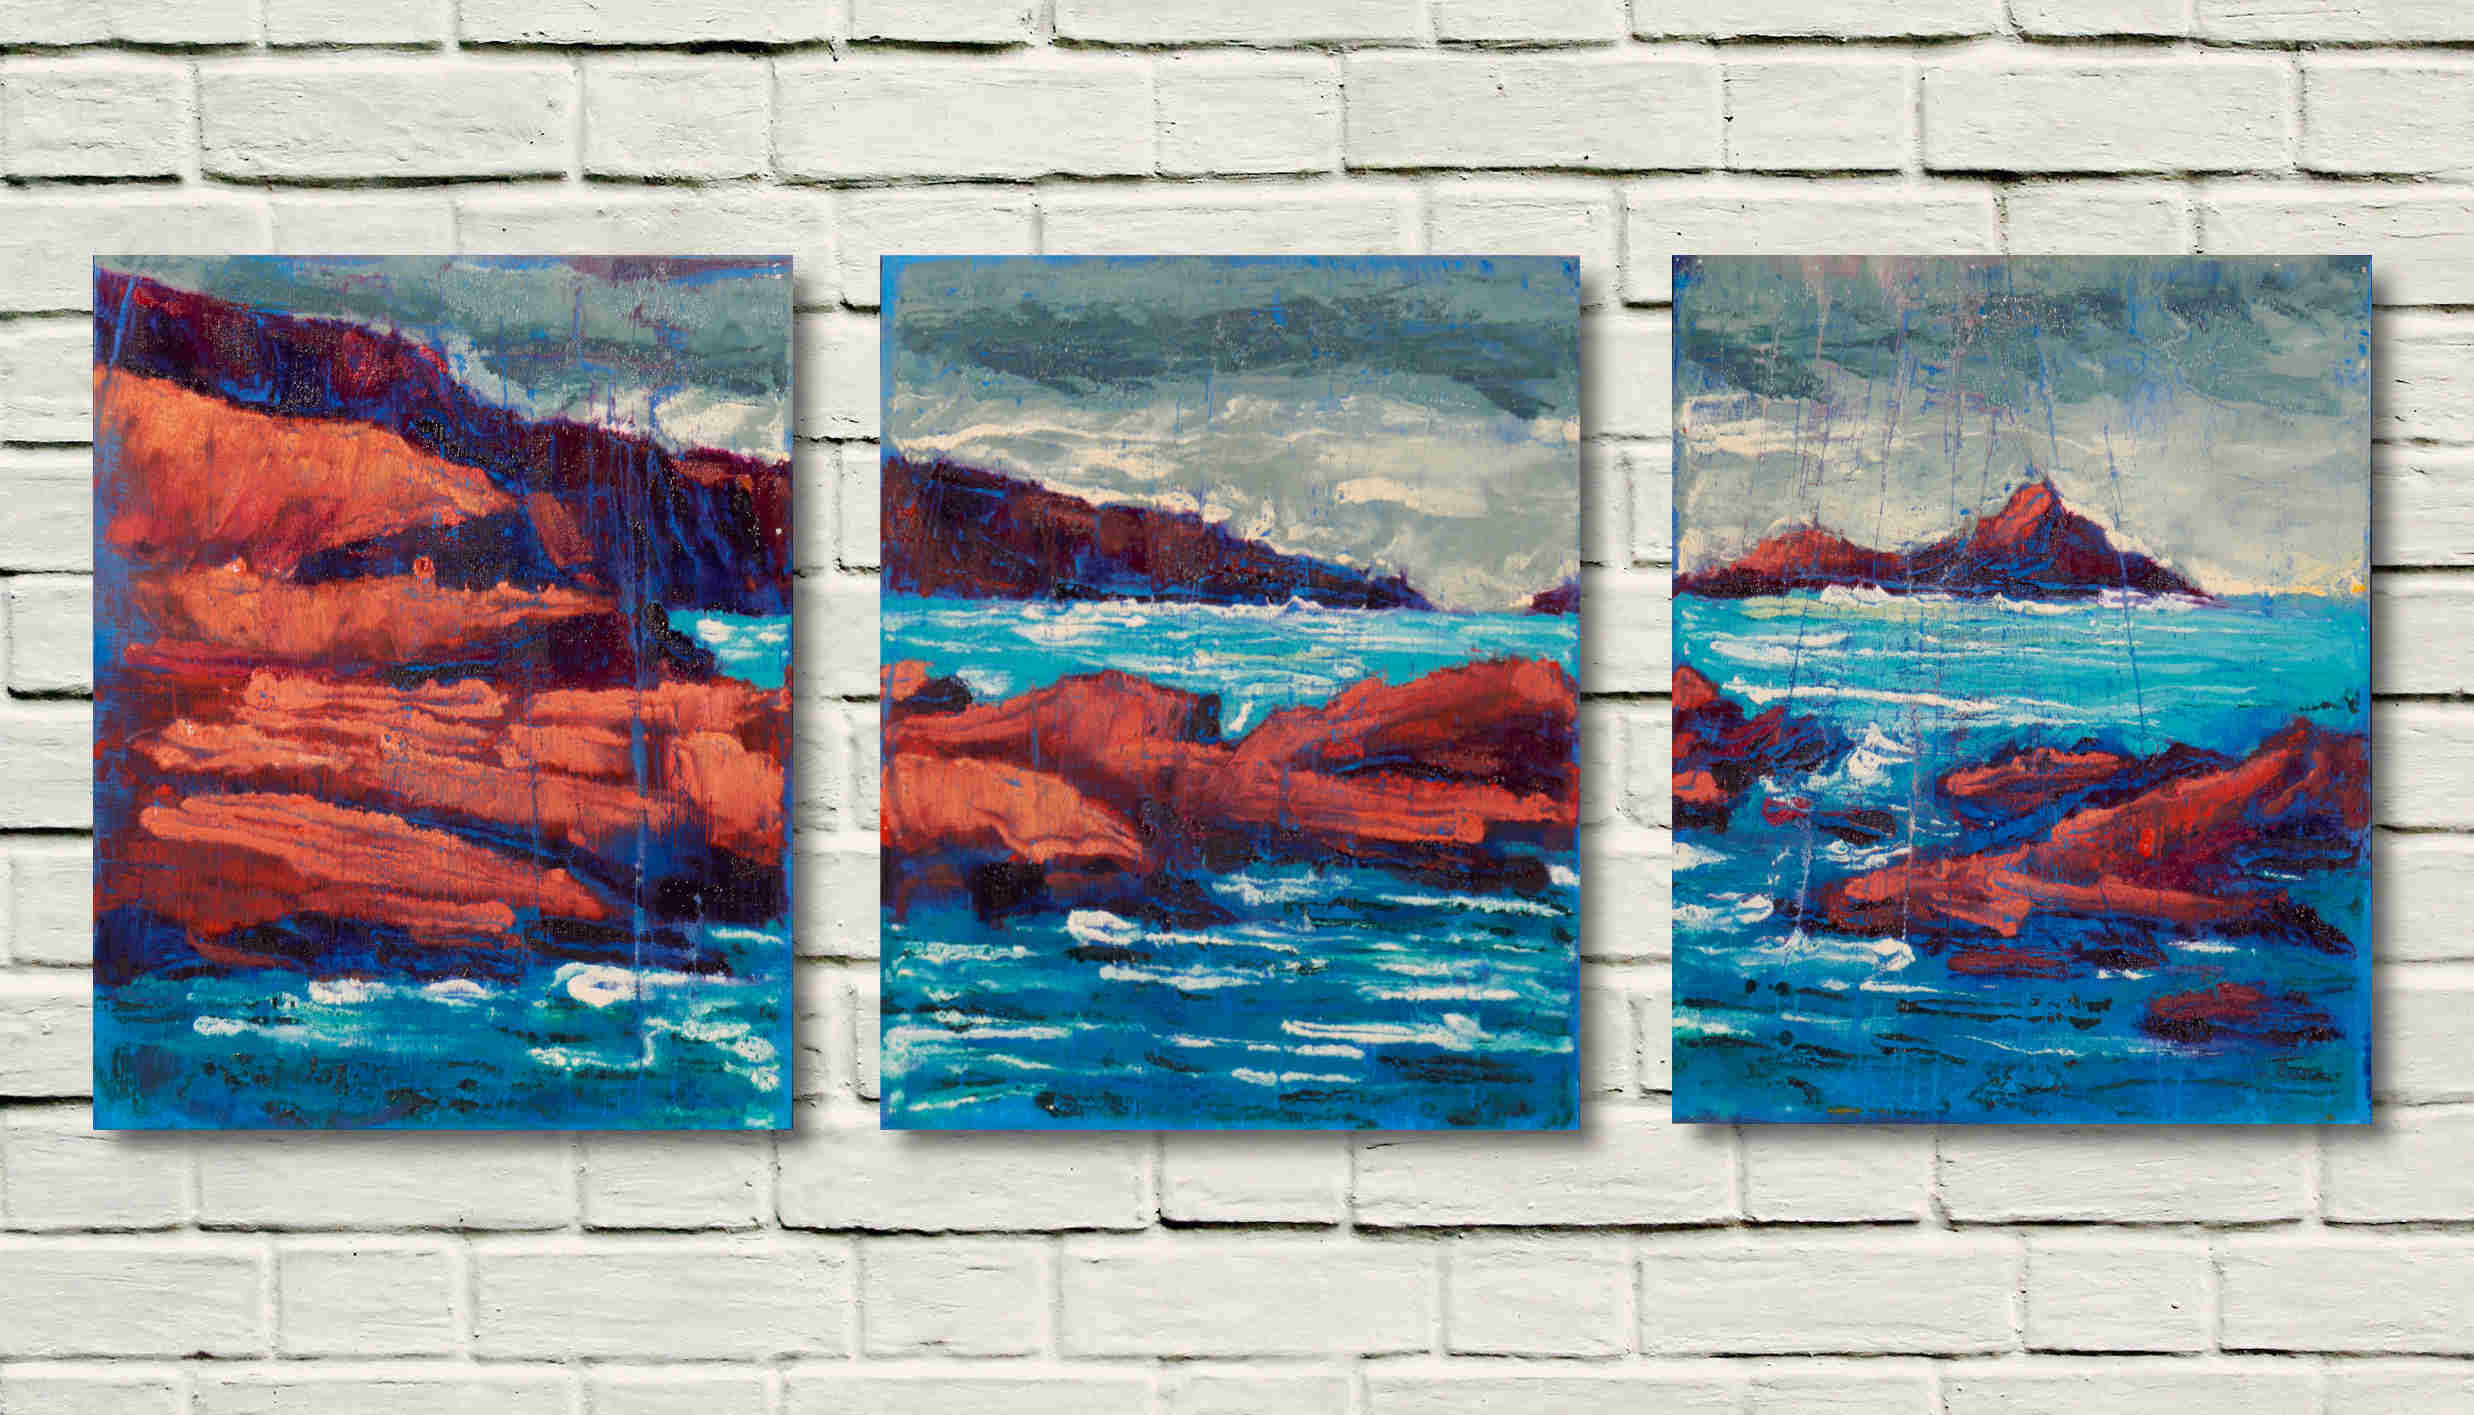 Artist Rod Coyne's triptych "Puffin Sound" is shown here, unframed on a white wall.